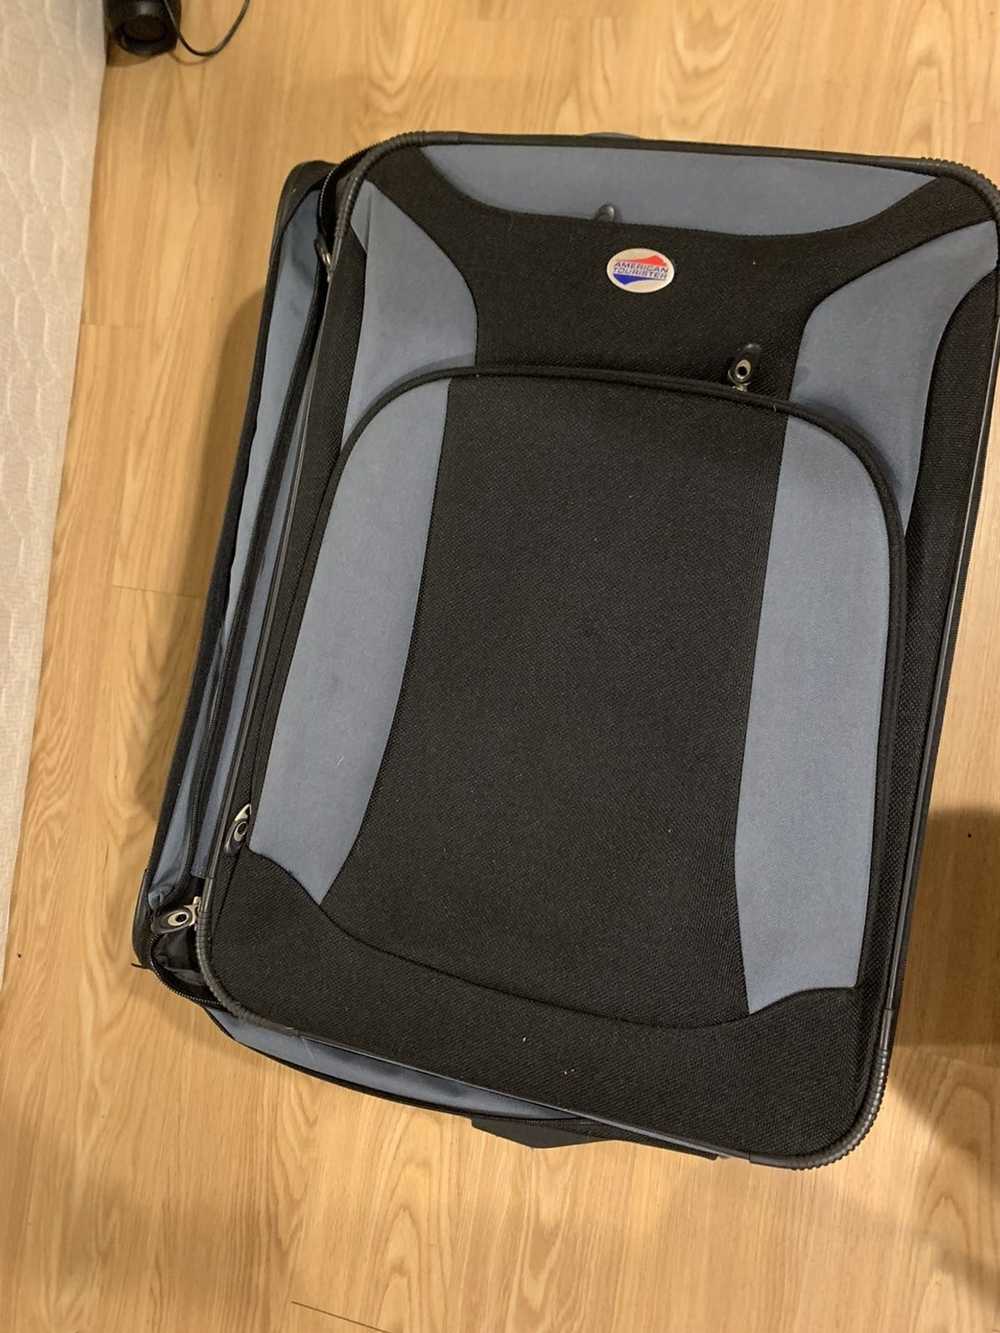 Bag American Tourister Large Suitcase - image 2